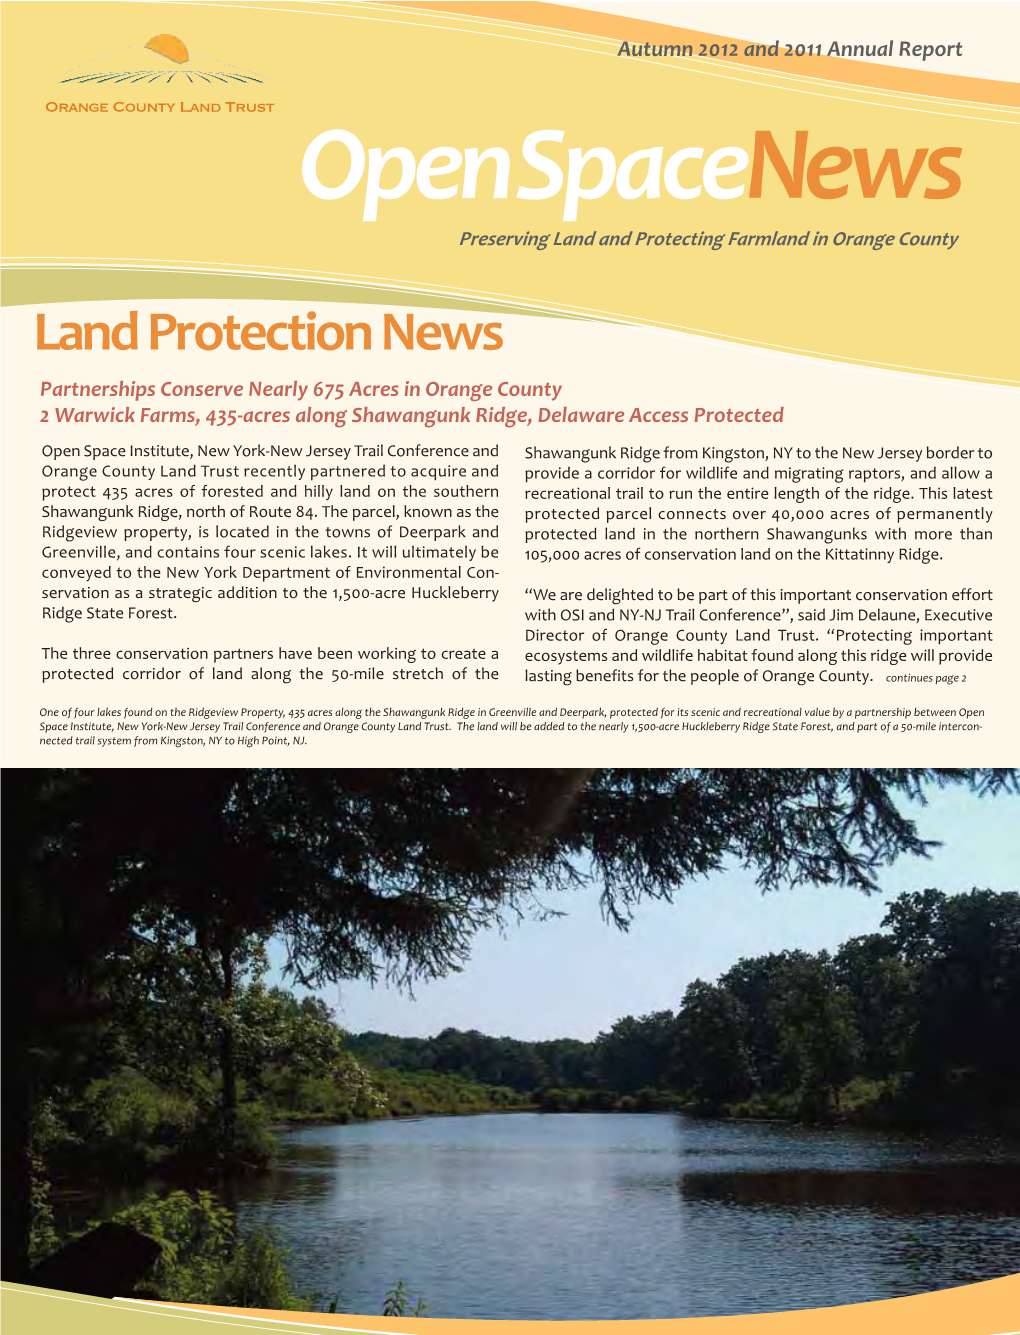 Openspacenews Preserving Land and Protecting Farmland in Orange County